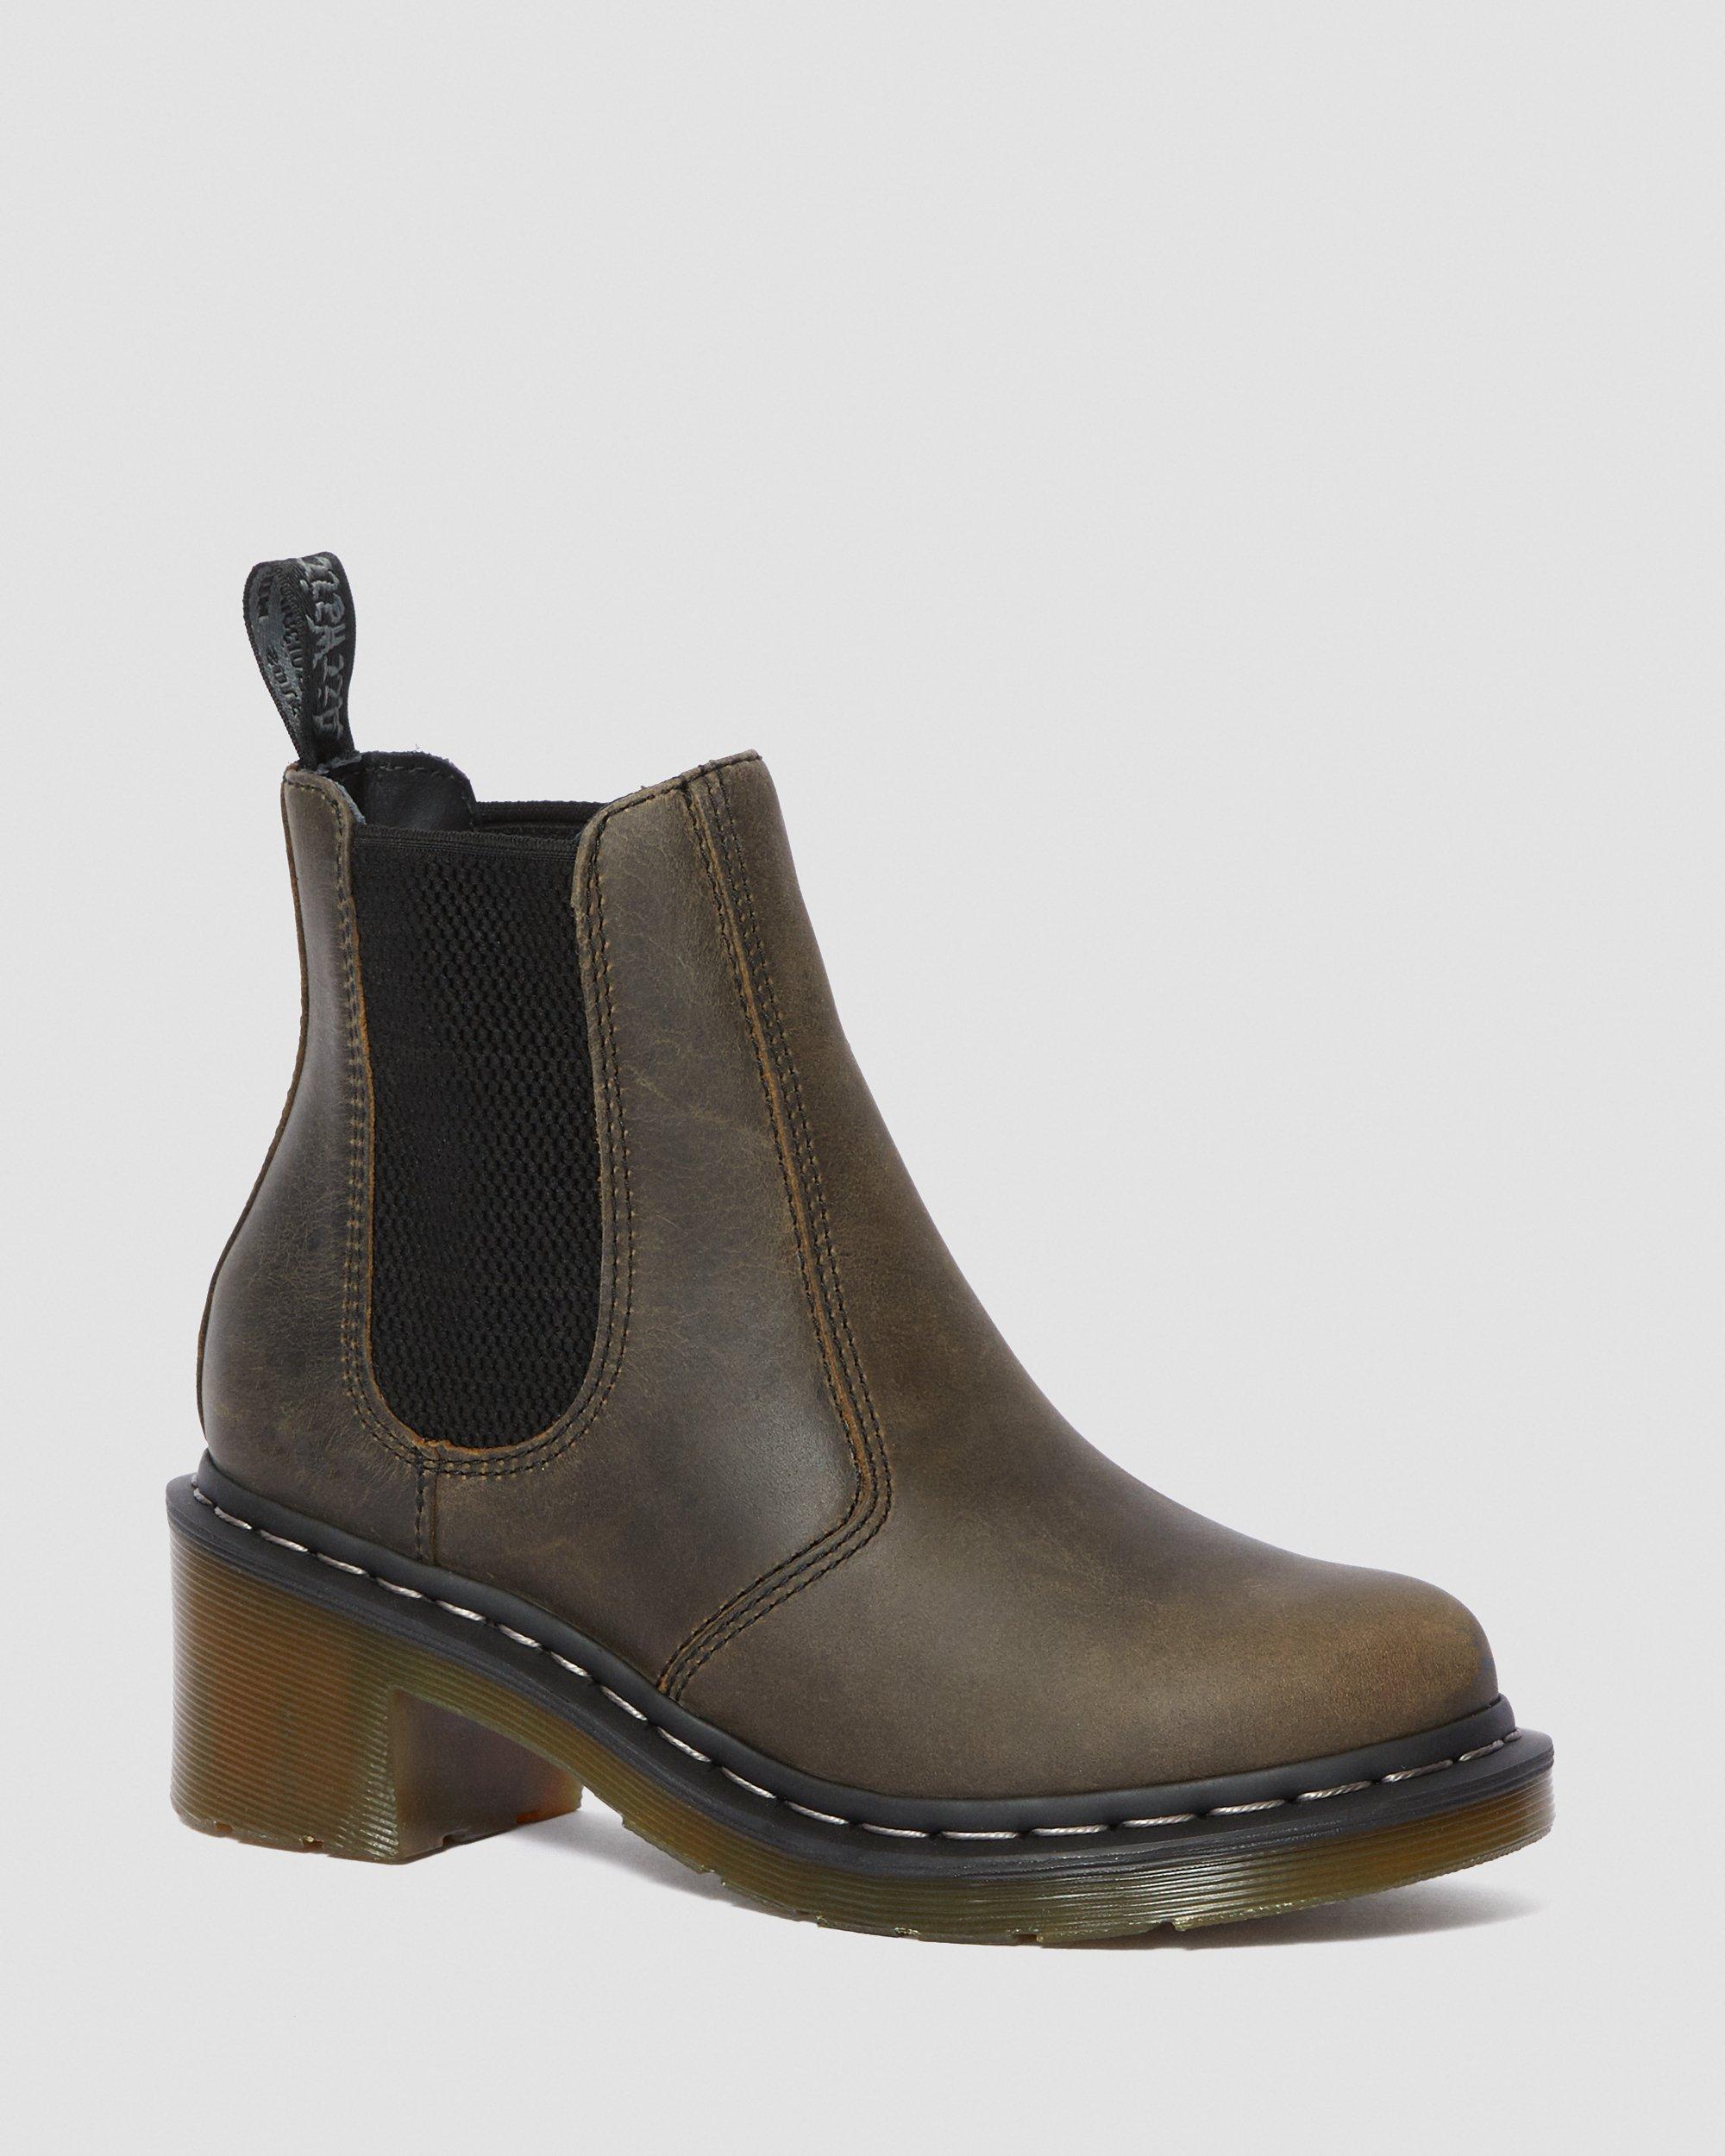 Cadence Greenland Heeled Chelsea Boots in Black | Dr. Martens